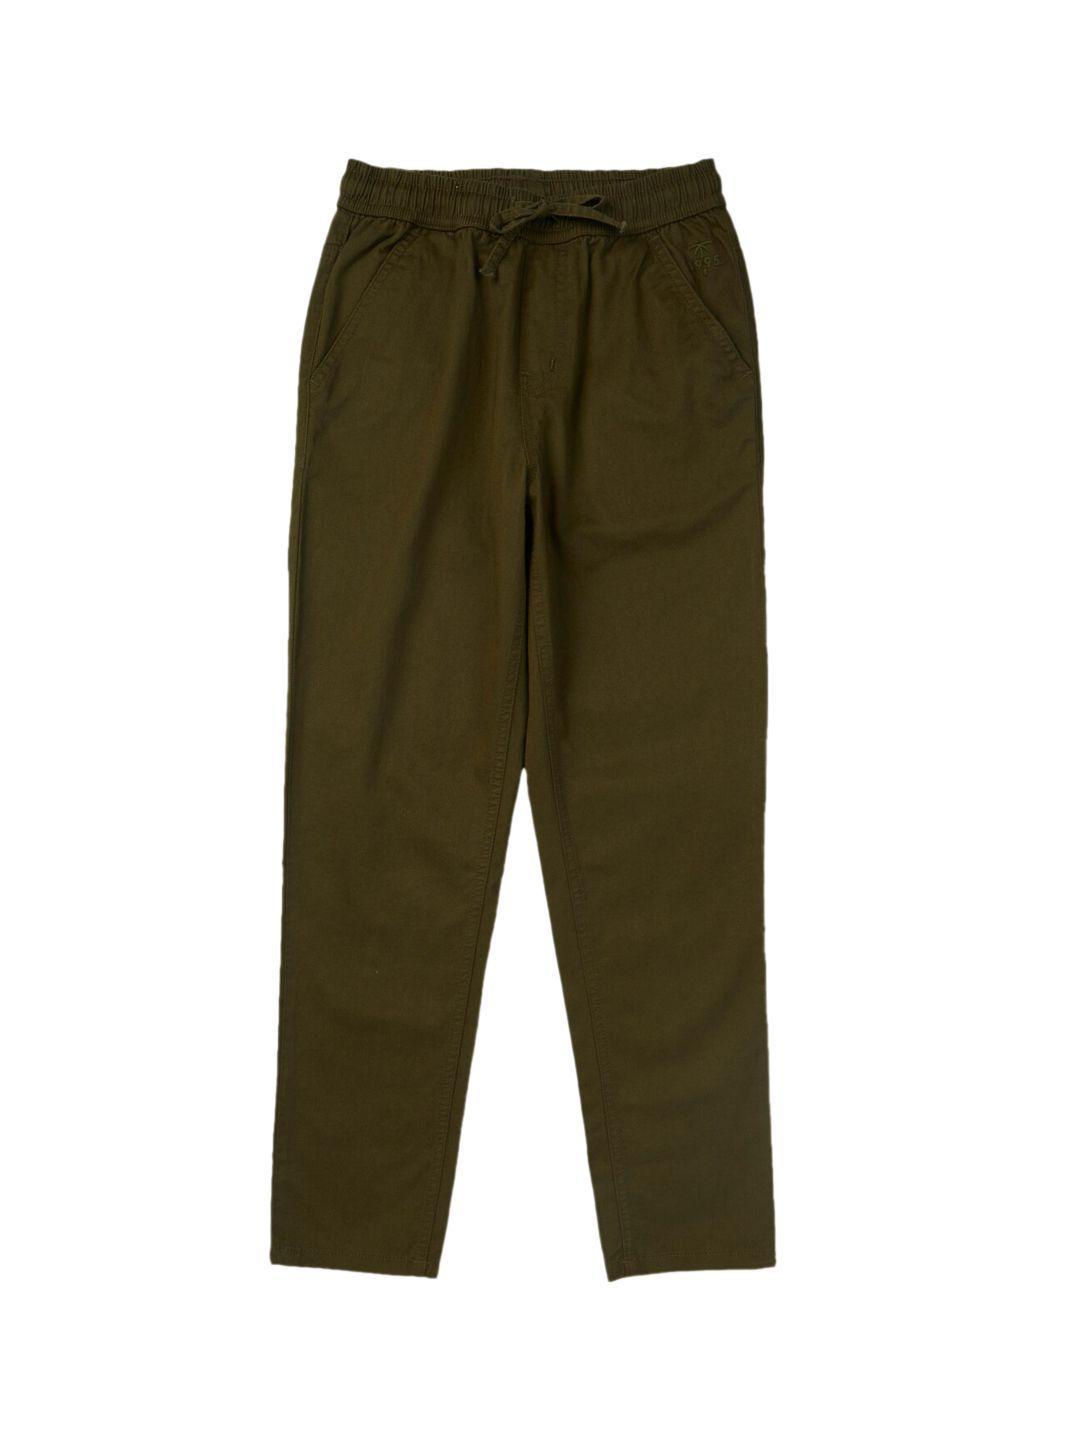 palm tree boys mid rise cotton chinos trousers